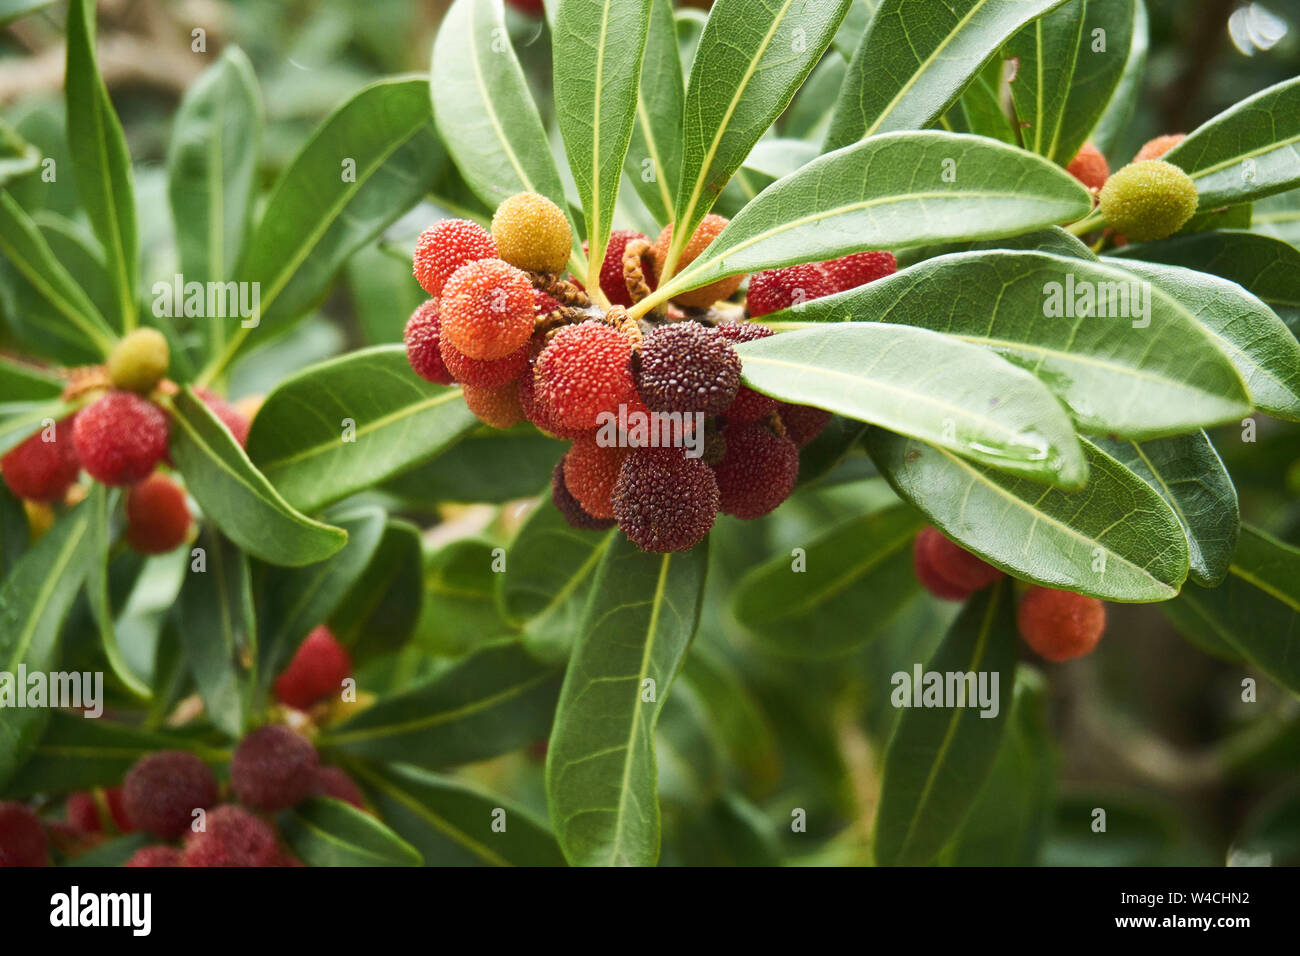 Myrica rubra fruit, also known as yangmei, yamamomo, Chinese bayberry, Japanese bayberry, red bayberry, yumberry, waxberry, ripen on a tree in Japan. Stock Photo